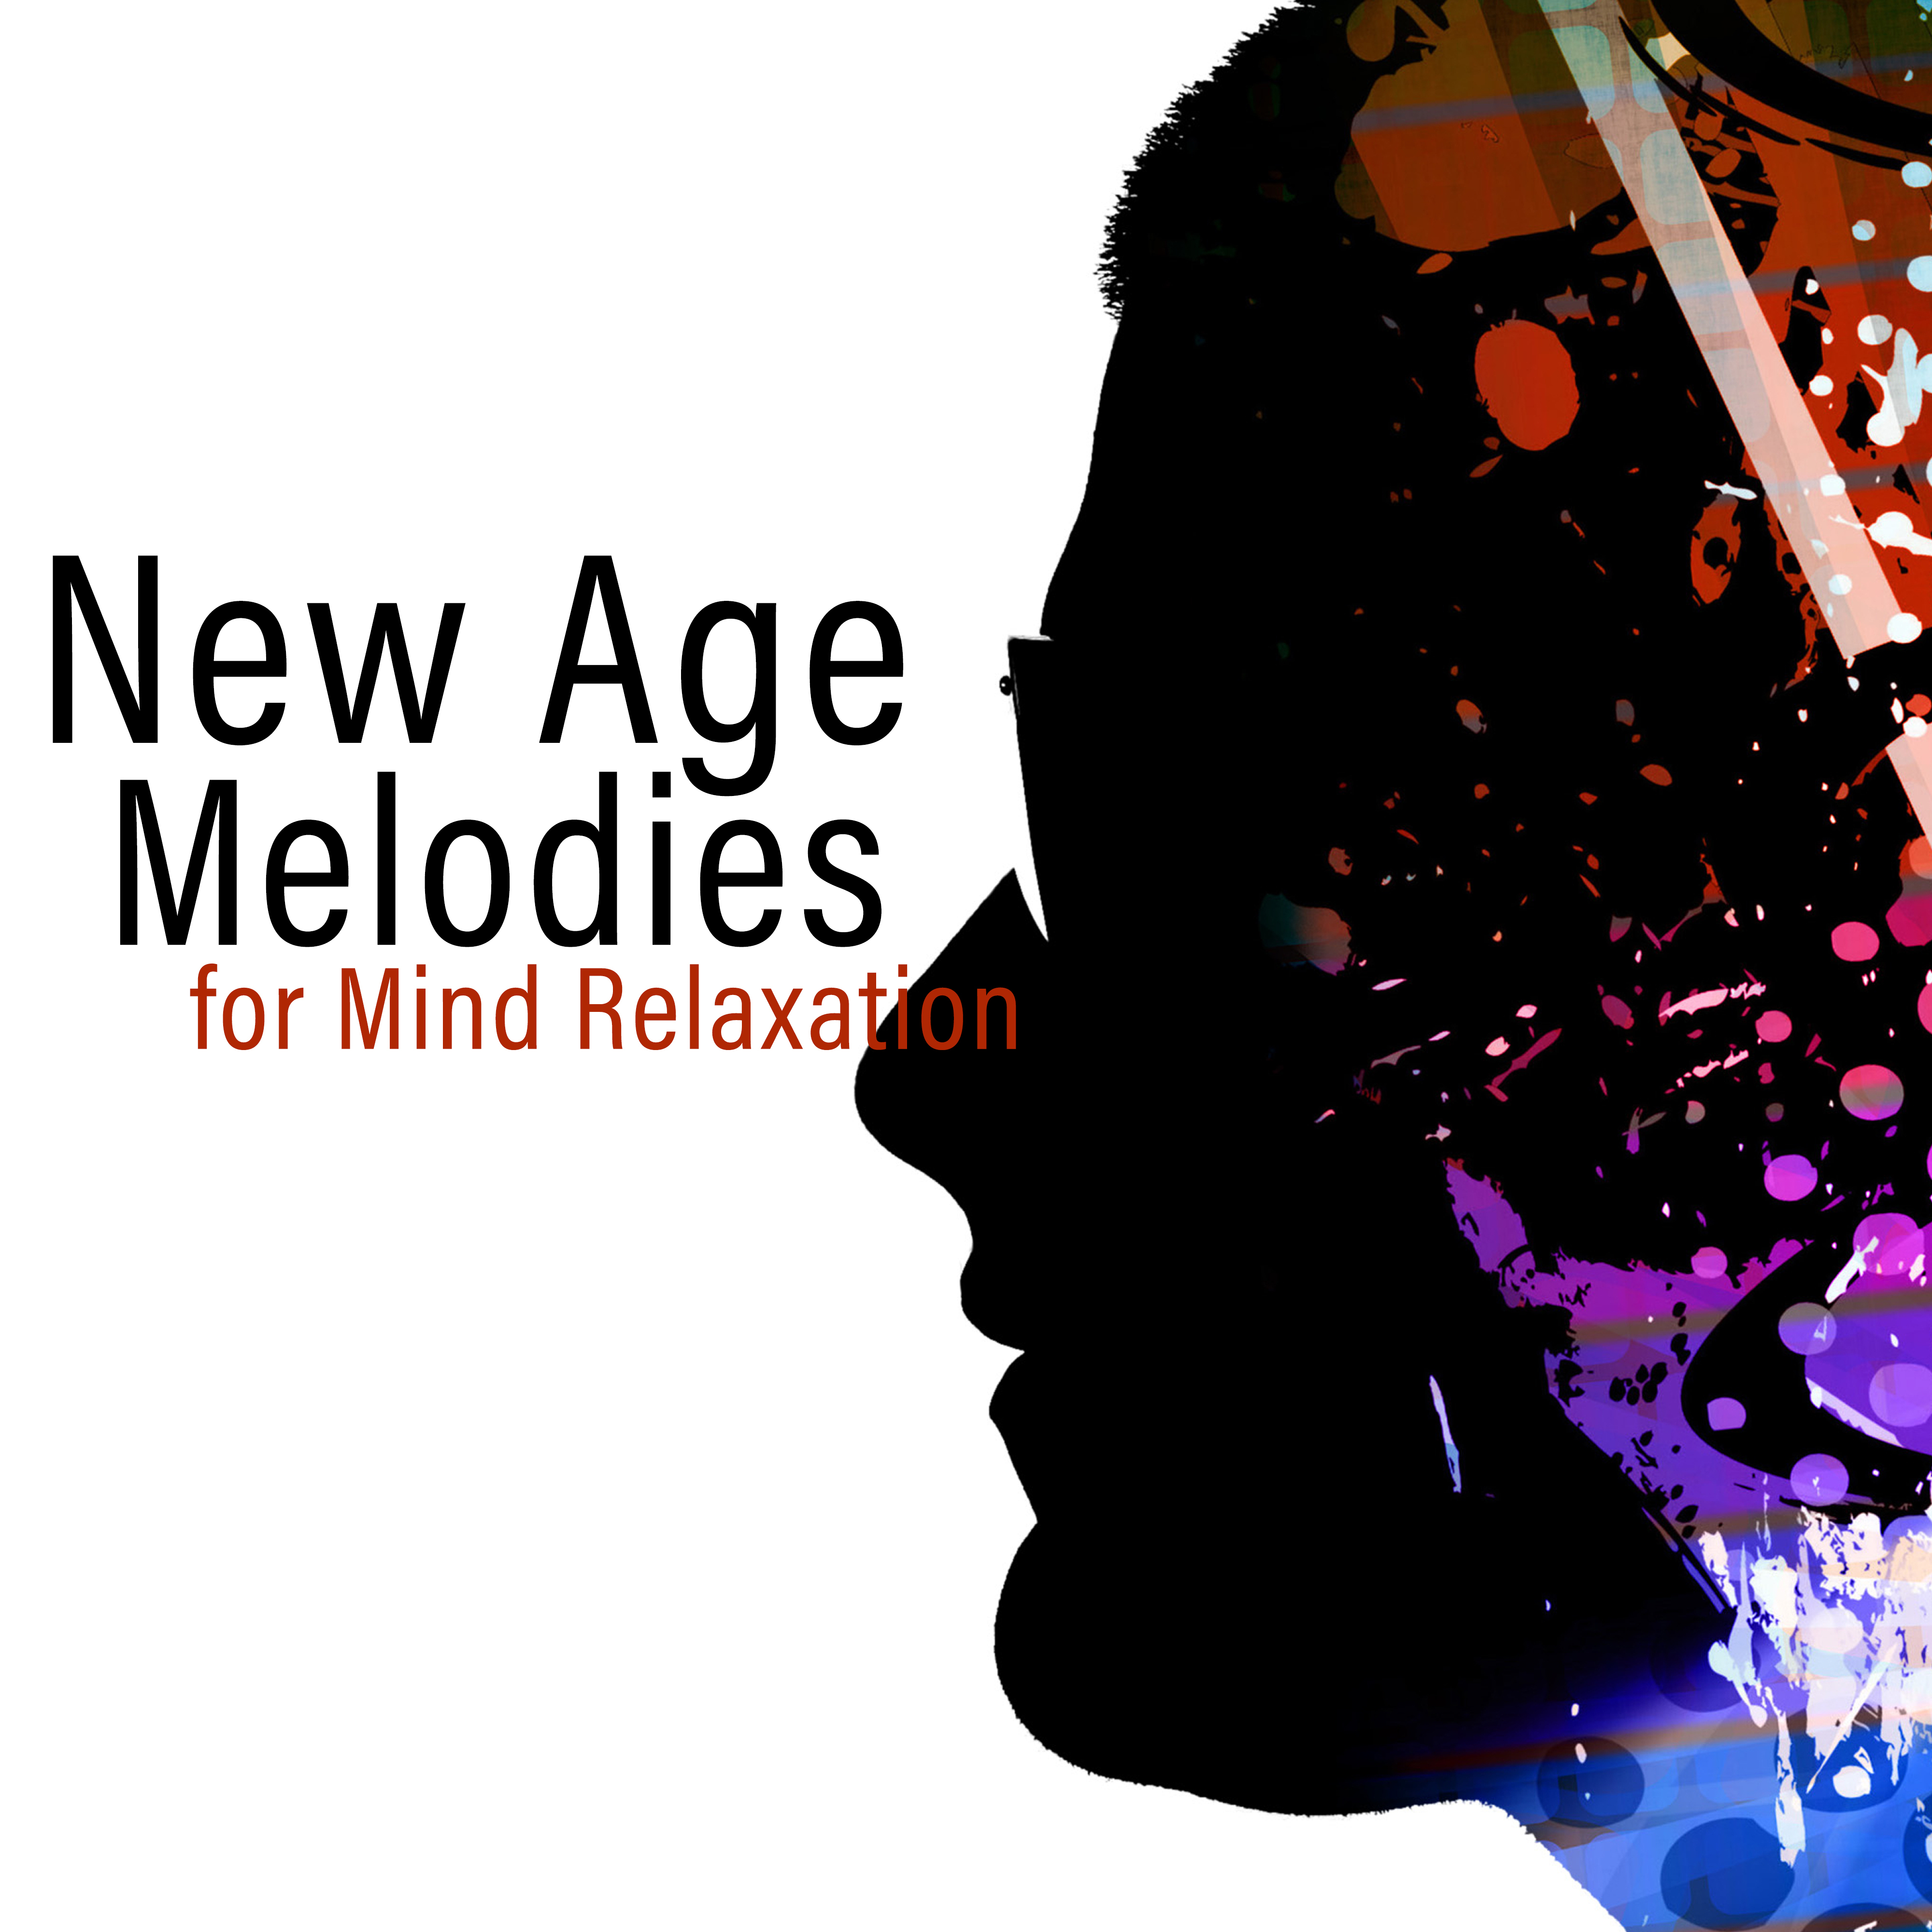 New Age Melodies for Mind Relaxation